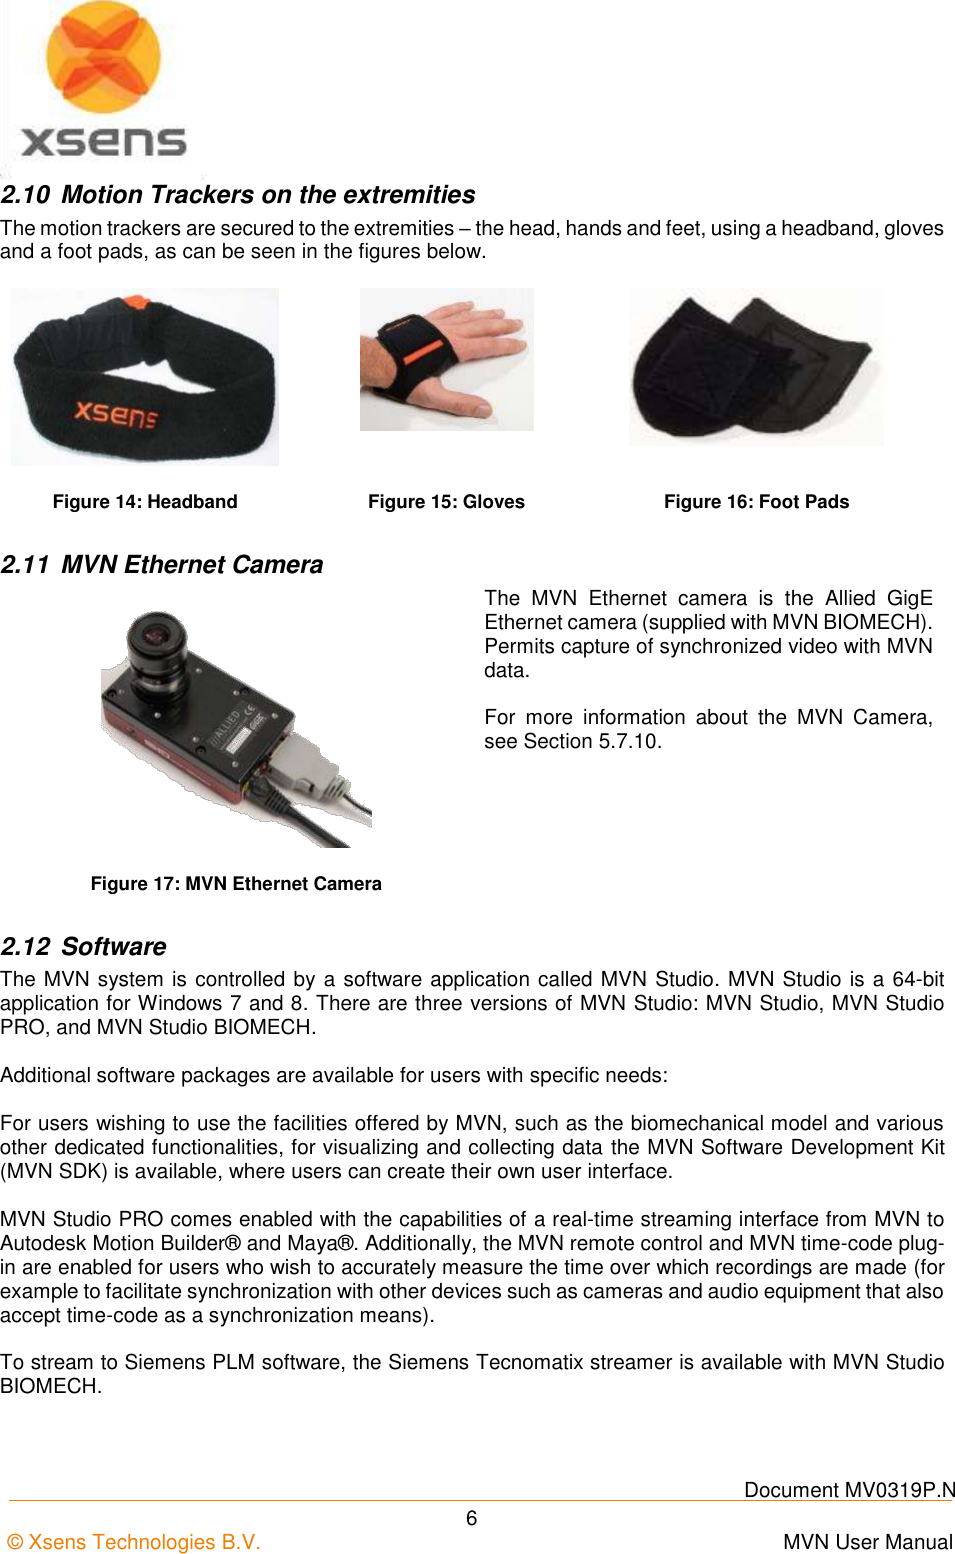    Document MV0319P.N © Xsens Technologies B.V.      MVN User Manual  6 2.10  Motion Trackers on the extremities The motion trackers are secured to the extremities – the head, hands and feet, using a headband, gloves and a foot pads, as can be seen in the figures below.    Figure 14: Headband Figure 15: Gloves Figure 16: Foot Pads 2.11  MVN Ethernet Camera  The  MVN  Ethernet  camera  is  the  Allied  GigE Ethernet camera (supplied with MVN BIOMECH). Permits capture of synchronized video with MVN data.  For  more  information  about  the  MVN  Camera, see Section 5.7.10. Figure 17: MVN Ethernet Camera 2.12  Software The MVN system is controlled by a software application called MVN Studio. MVN Studio is a 64-bit application for Windows 7 and 8. There are three versions of MVN Studio: MVN Studio, MVN Studio PRO, and MVN Studio BIOMECH.  Additional software packages are available for users with specific needs:   For users wishing to use the facilities offered by MVN, such as the biomechanical model and various other dedicated functionalities, for visualizing and collecting data the MVN Software Development Kit (MVN SDK) is available, where users can create their own user interface.  MVN Studio PRO comes enabled with the capabilities of a real-time streaming interface from MVN to Autodesk Motion Builder® and Maya®. Additionally, the MVN remote control and MVN time-code plug-in are enabled for users who wish to accurately measure the time over which recordings are made (for example to facilitate synchronization with other devices such as cameras and audio equipment that also accept time-code as a synchronization means).  To stream to Siemens PLM software, the Siemens Tecnomatix streamer is available with MVN Studio BIOMECH. 